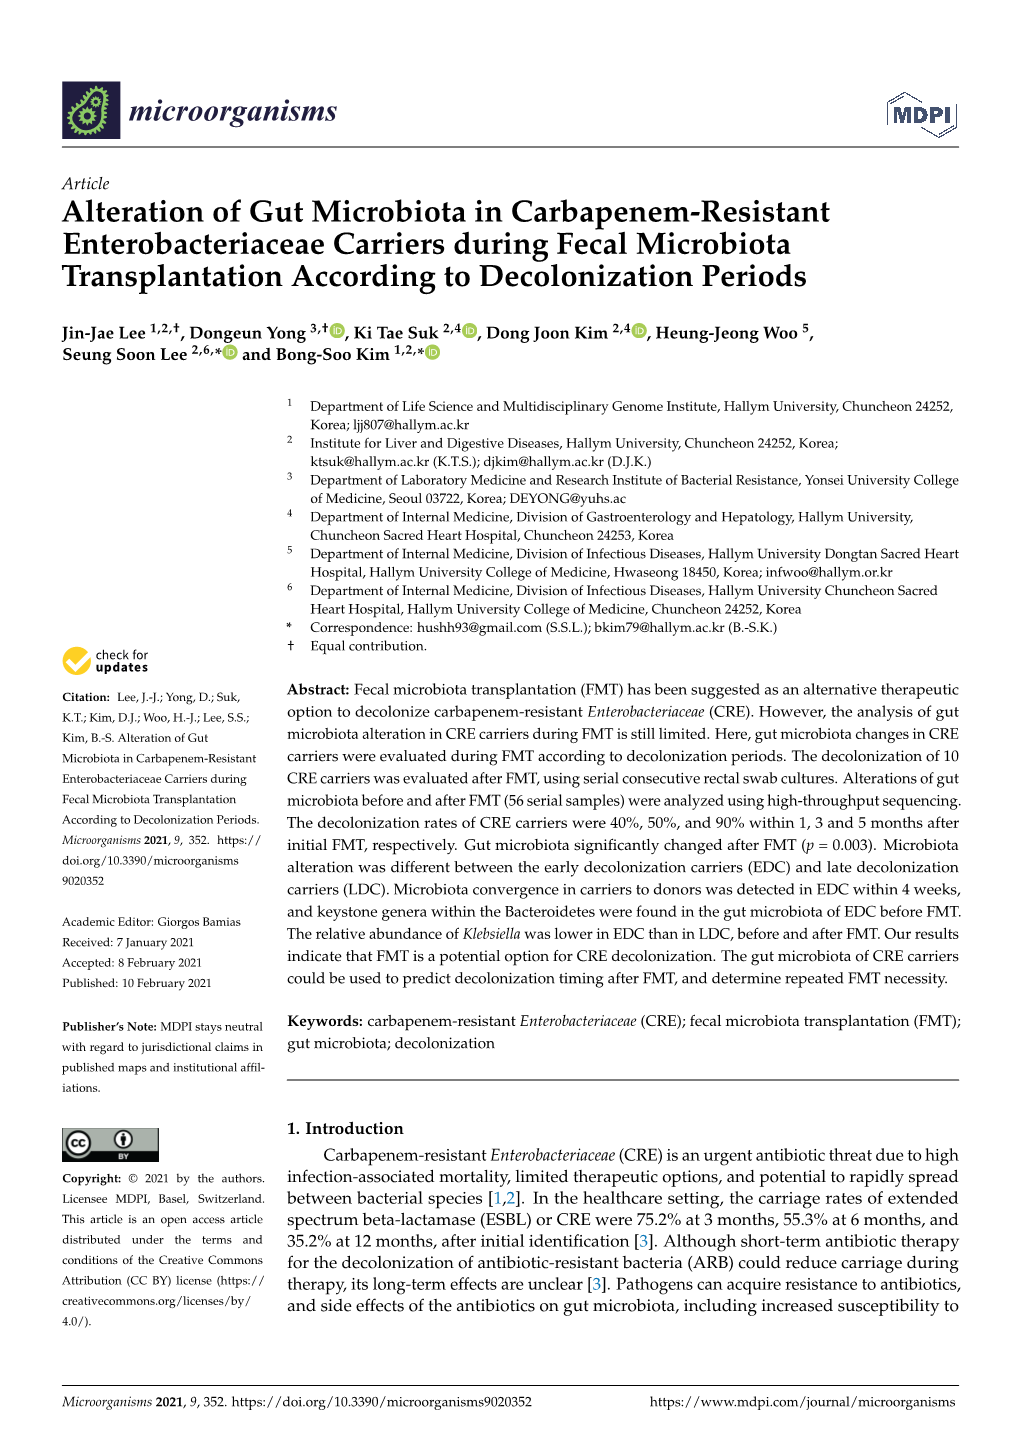 Alteration of Gut Microbiota in Carbapenem-Resistant Enterobacteriaceae Carriers During Fecal Microbiota Transplantation According to Decolonization Periods